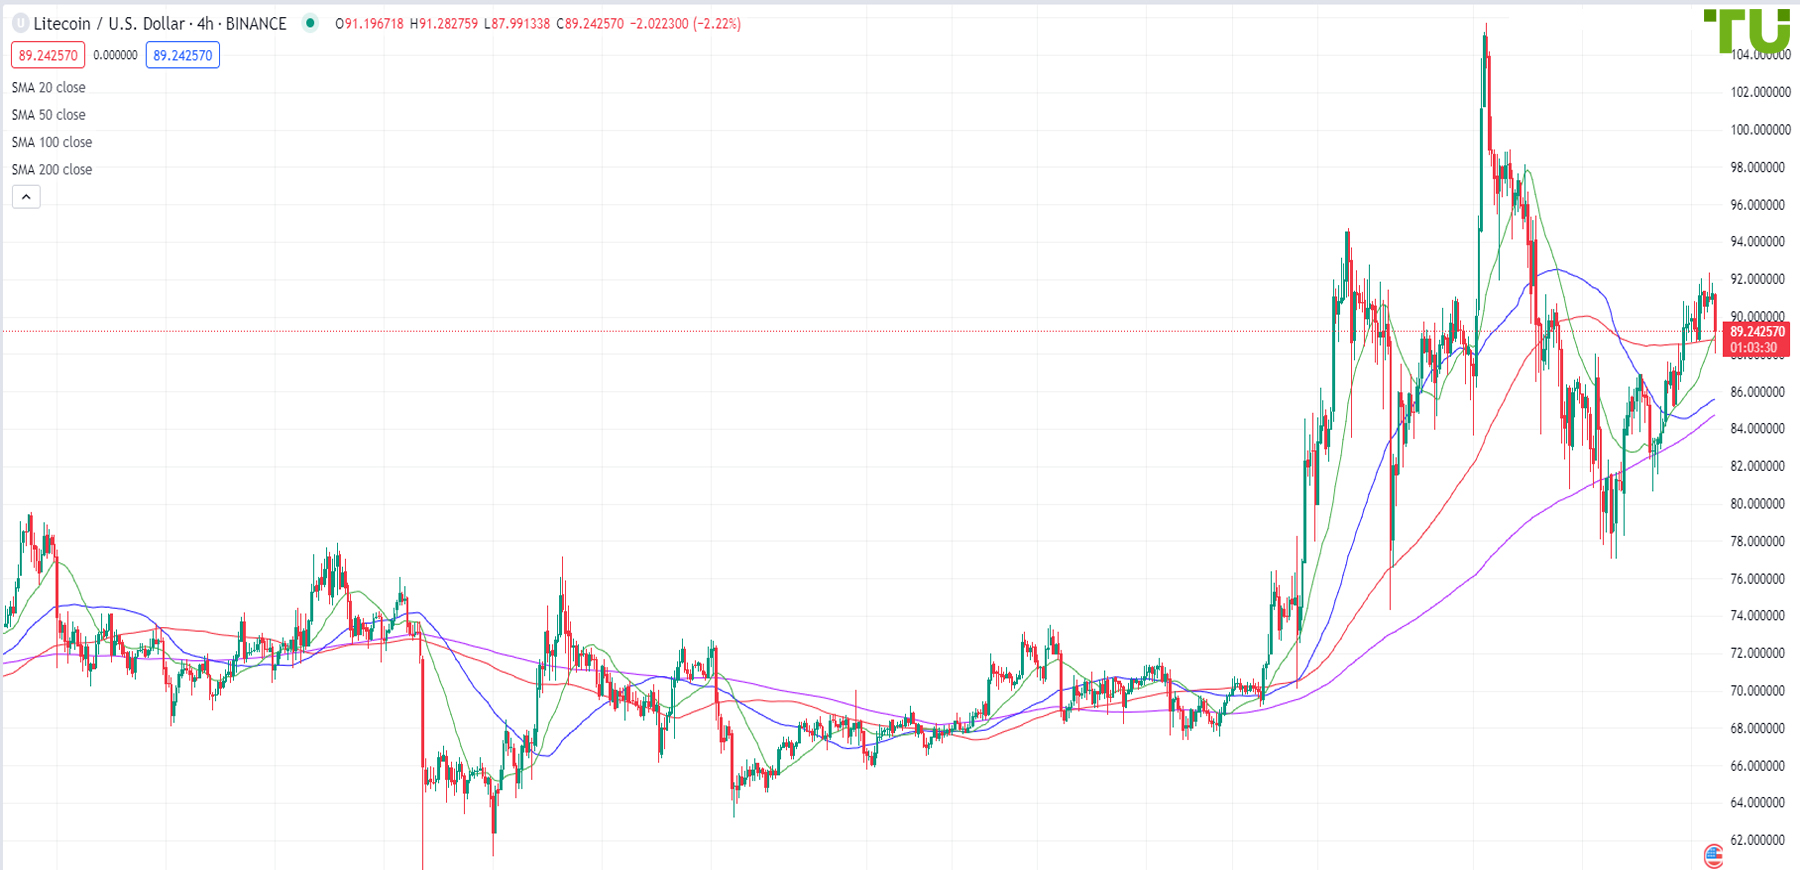 LTC/USD is under pressure again after recovery